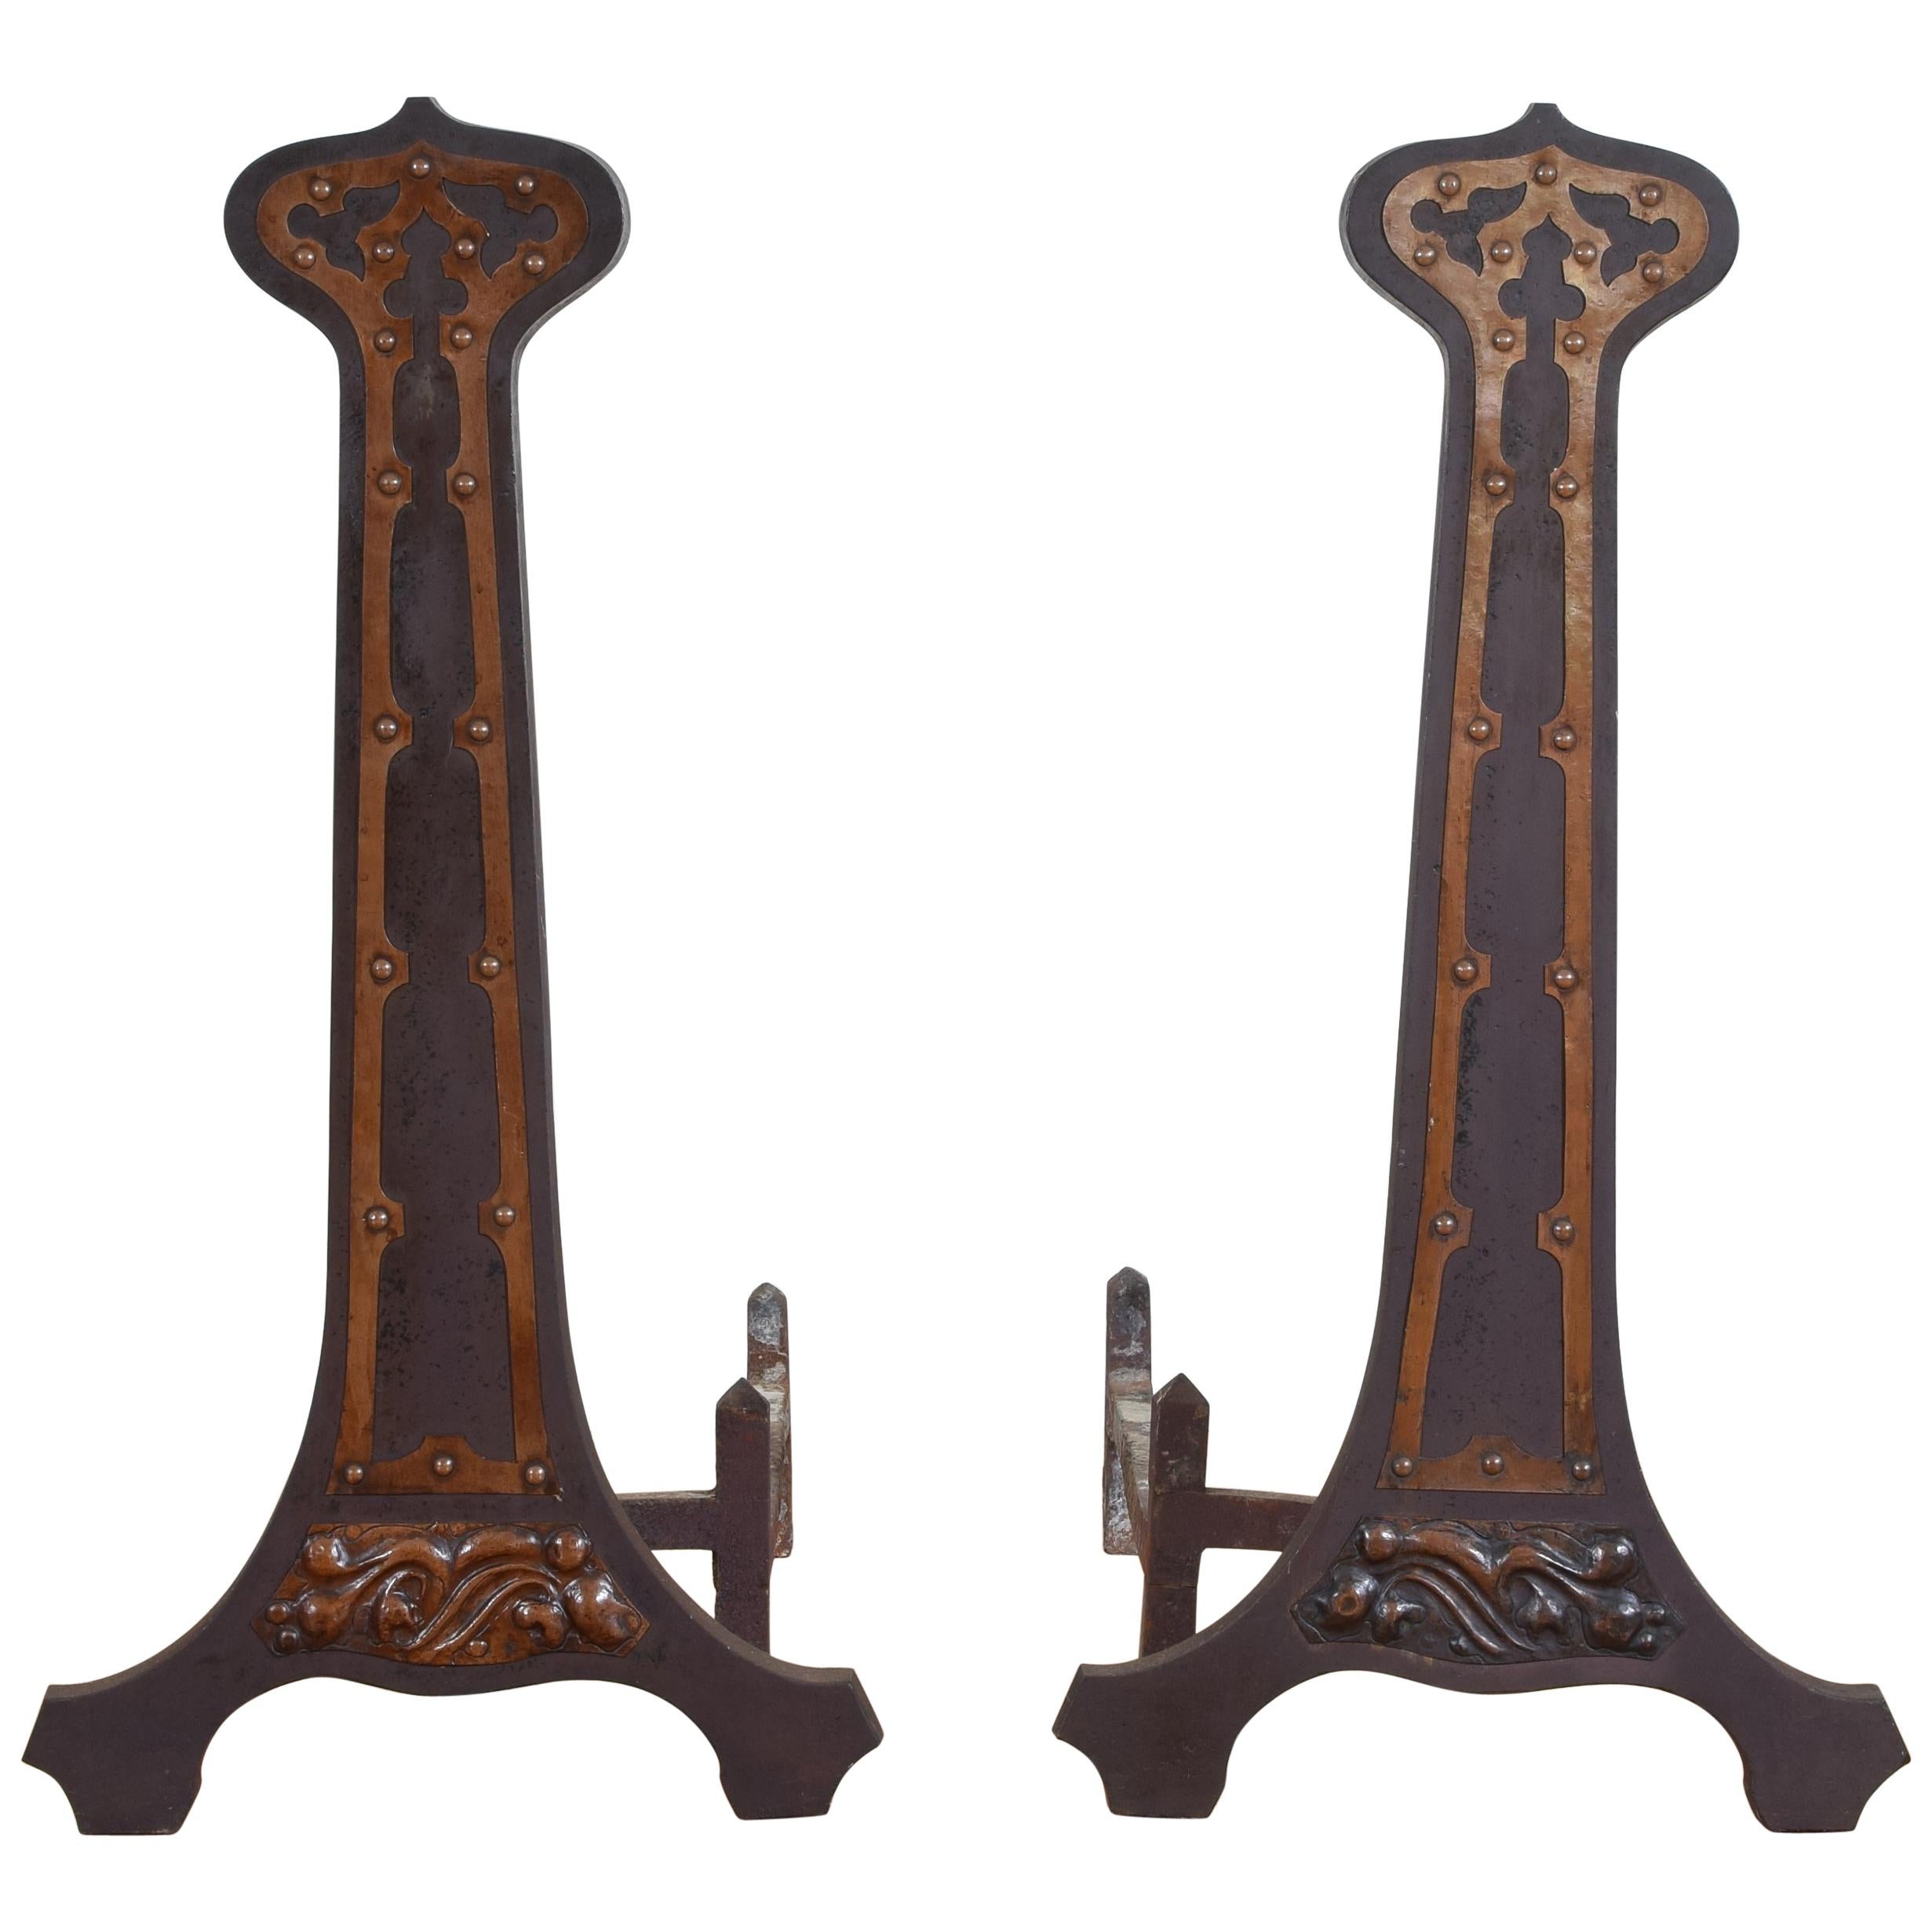 Pair of American Arts and Crafts Cast Iron and Copper Andirons, circa 1890-1900